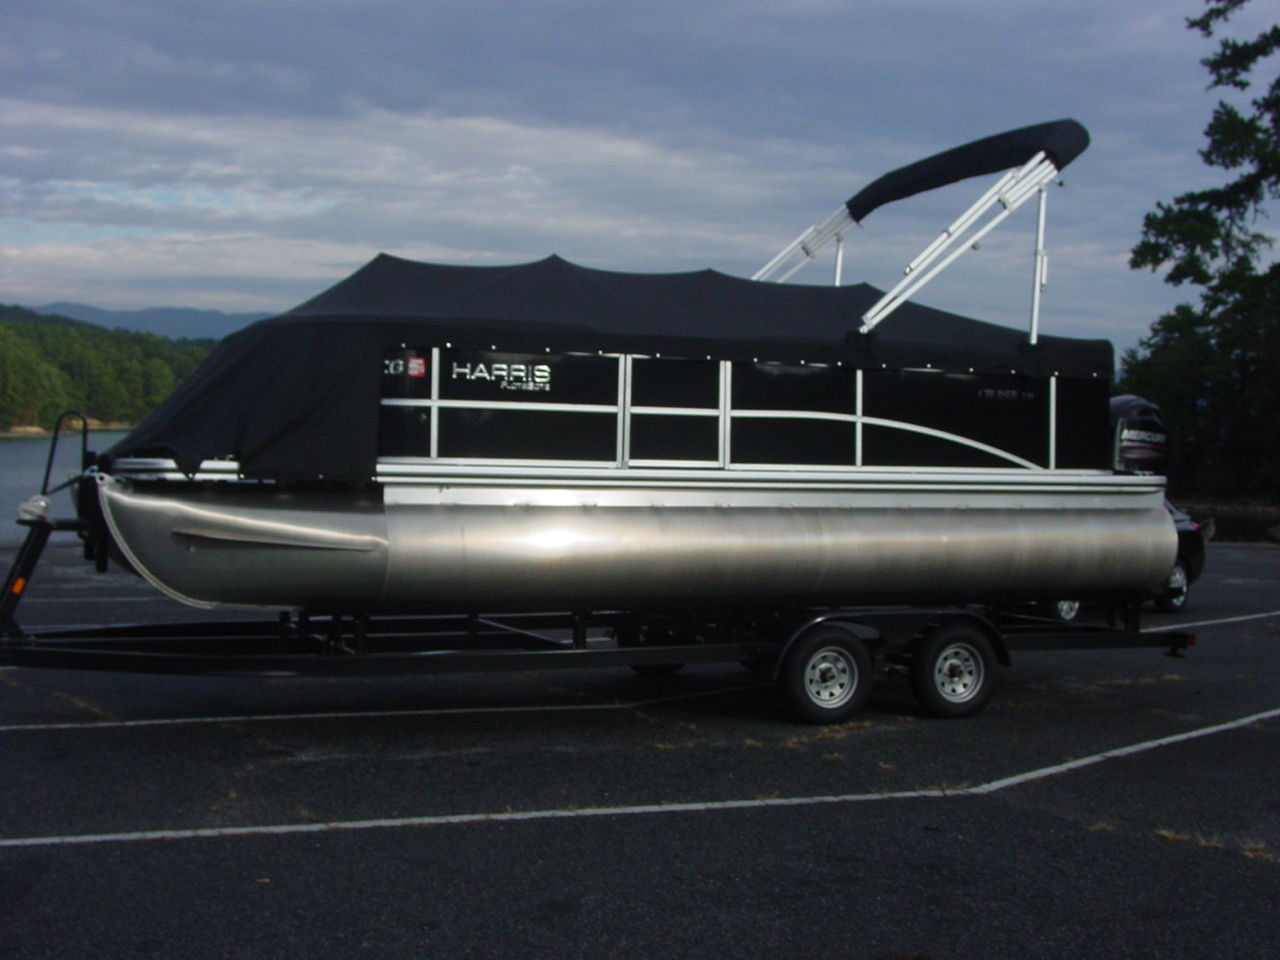 harris flotebote cruiser 220 2013 for sale for ,500